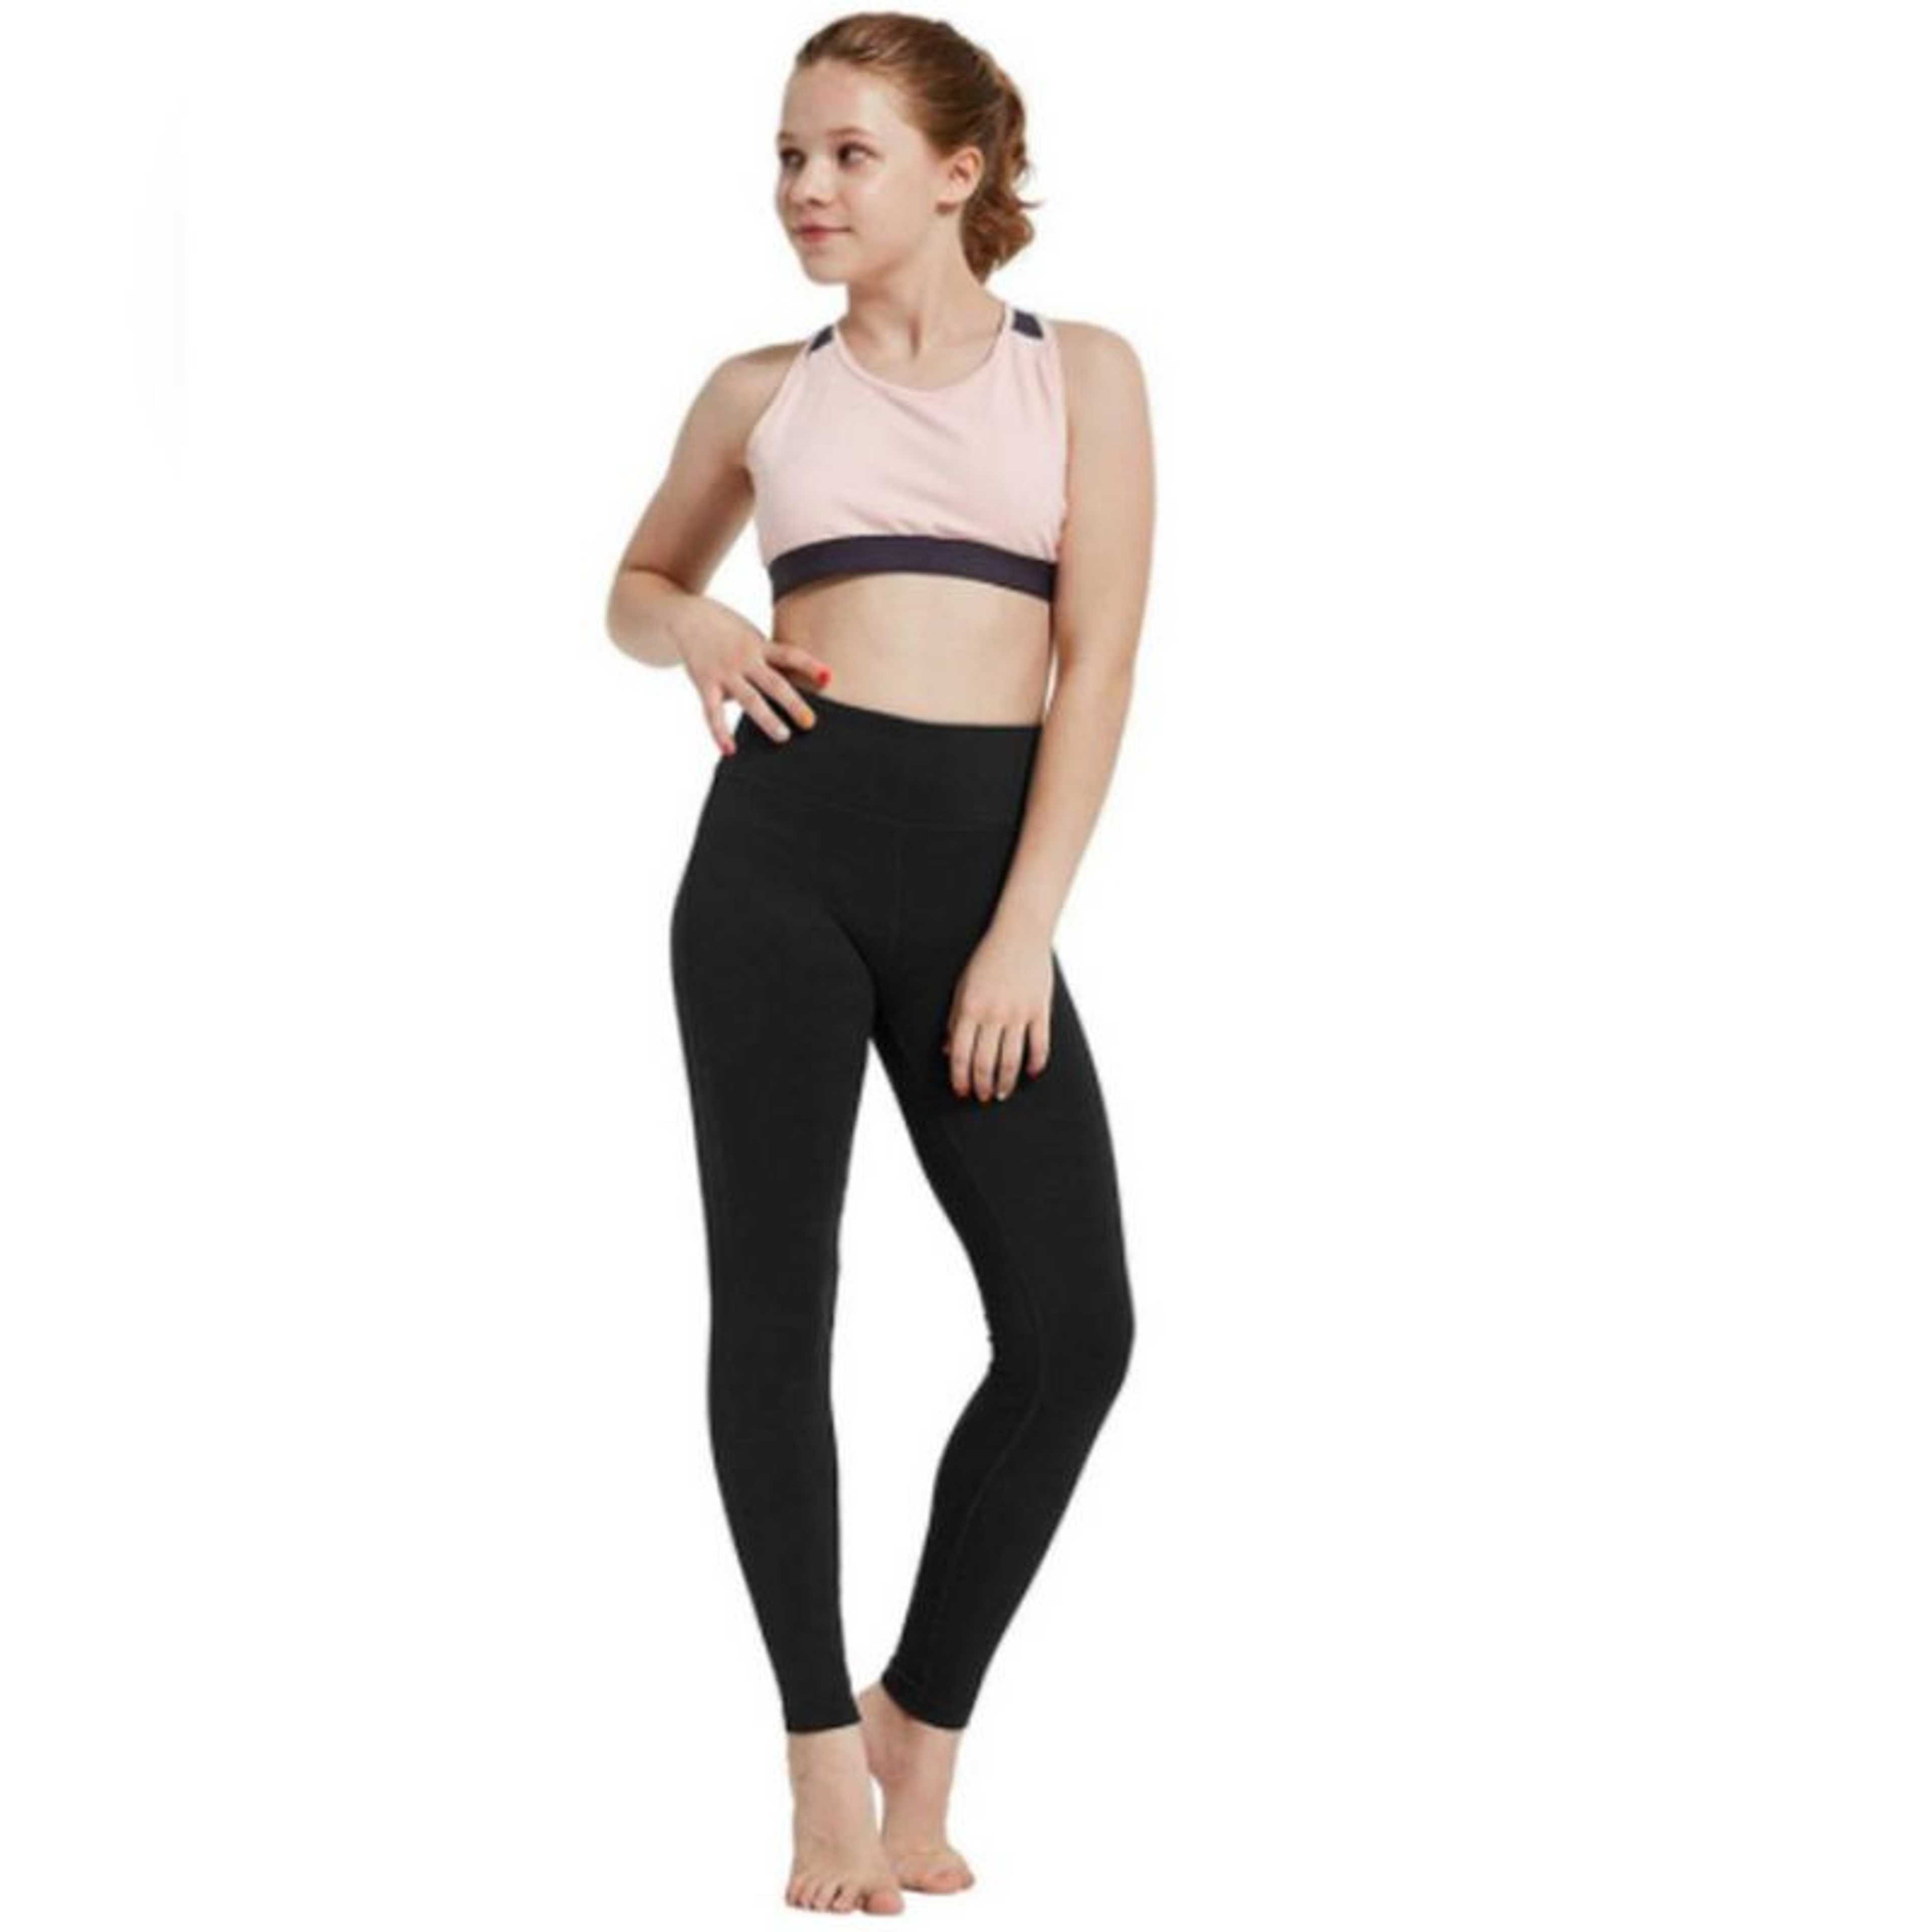 Youth Girl's Black High waist Athletic Leggings for Gym, Sports, Daily Casual Wear